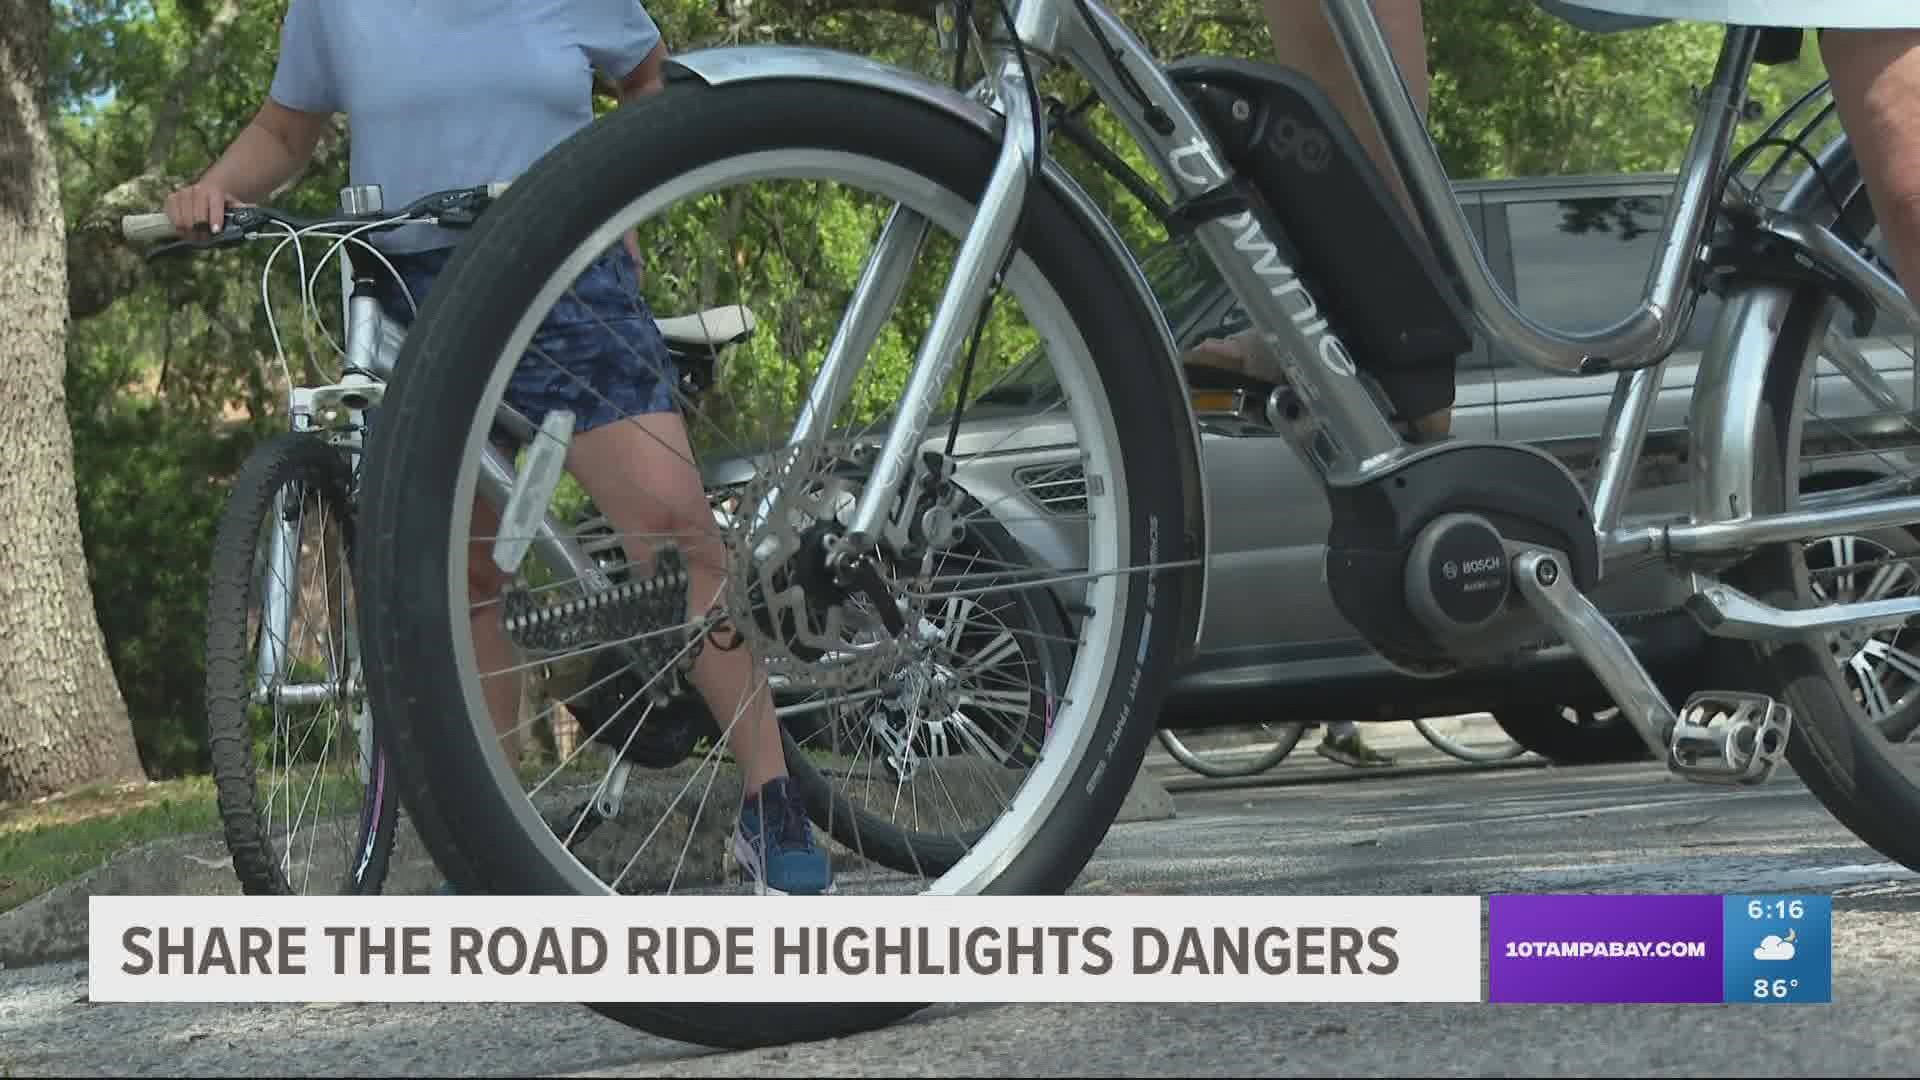 Florida is among the top states in the nation when it comes to cycling crashes and pedestrian deaths.